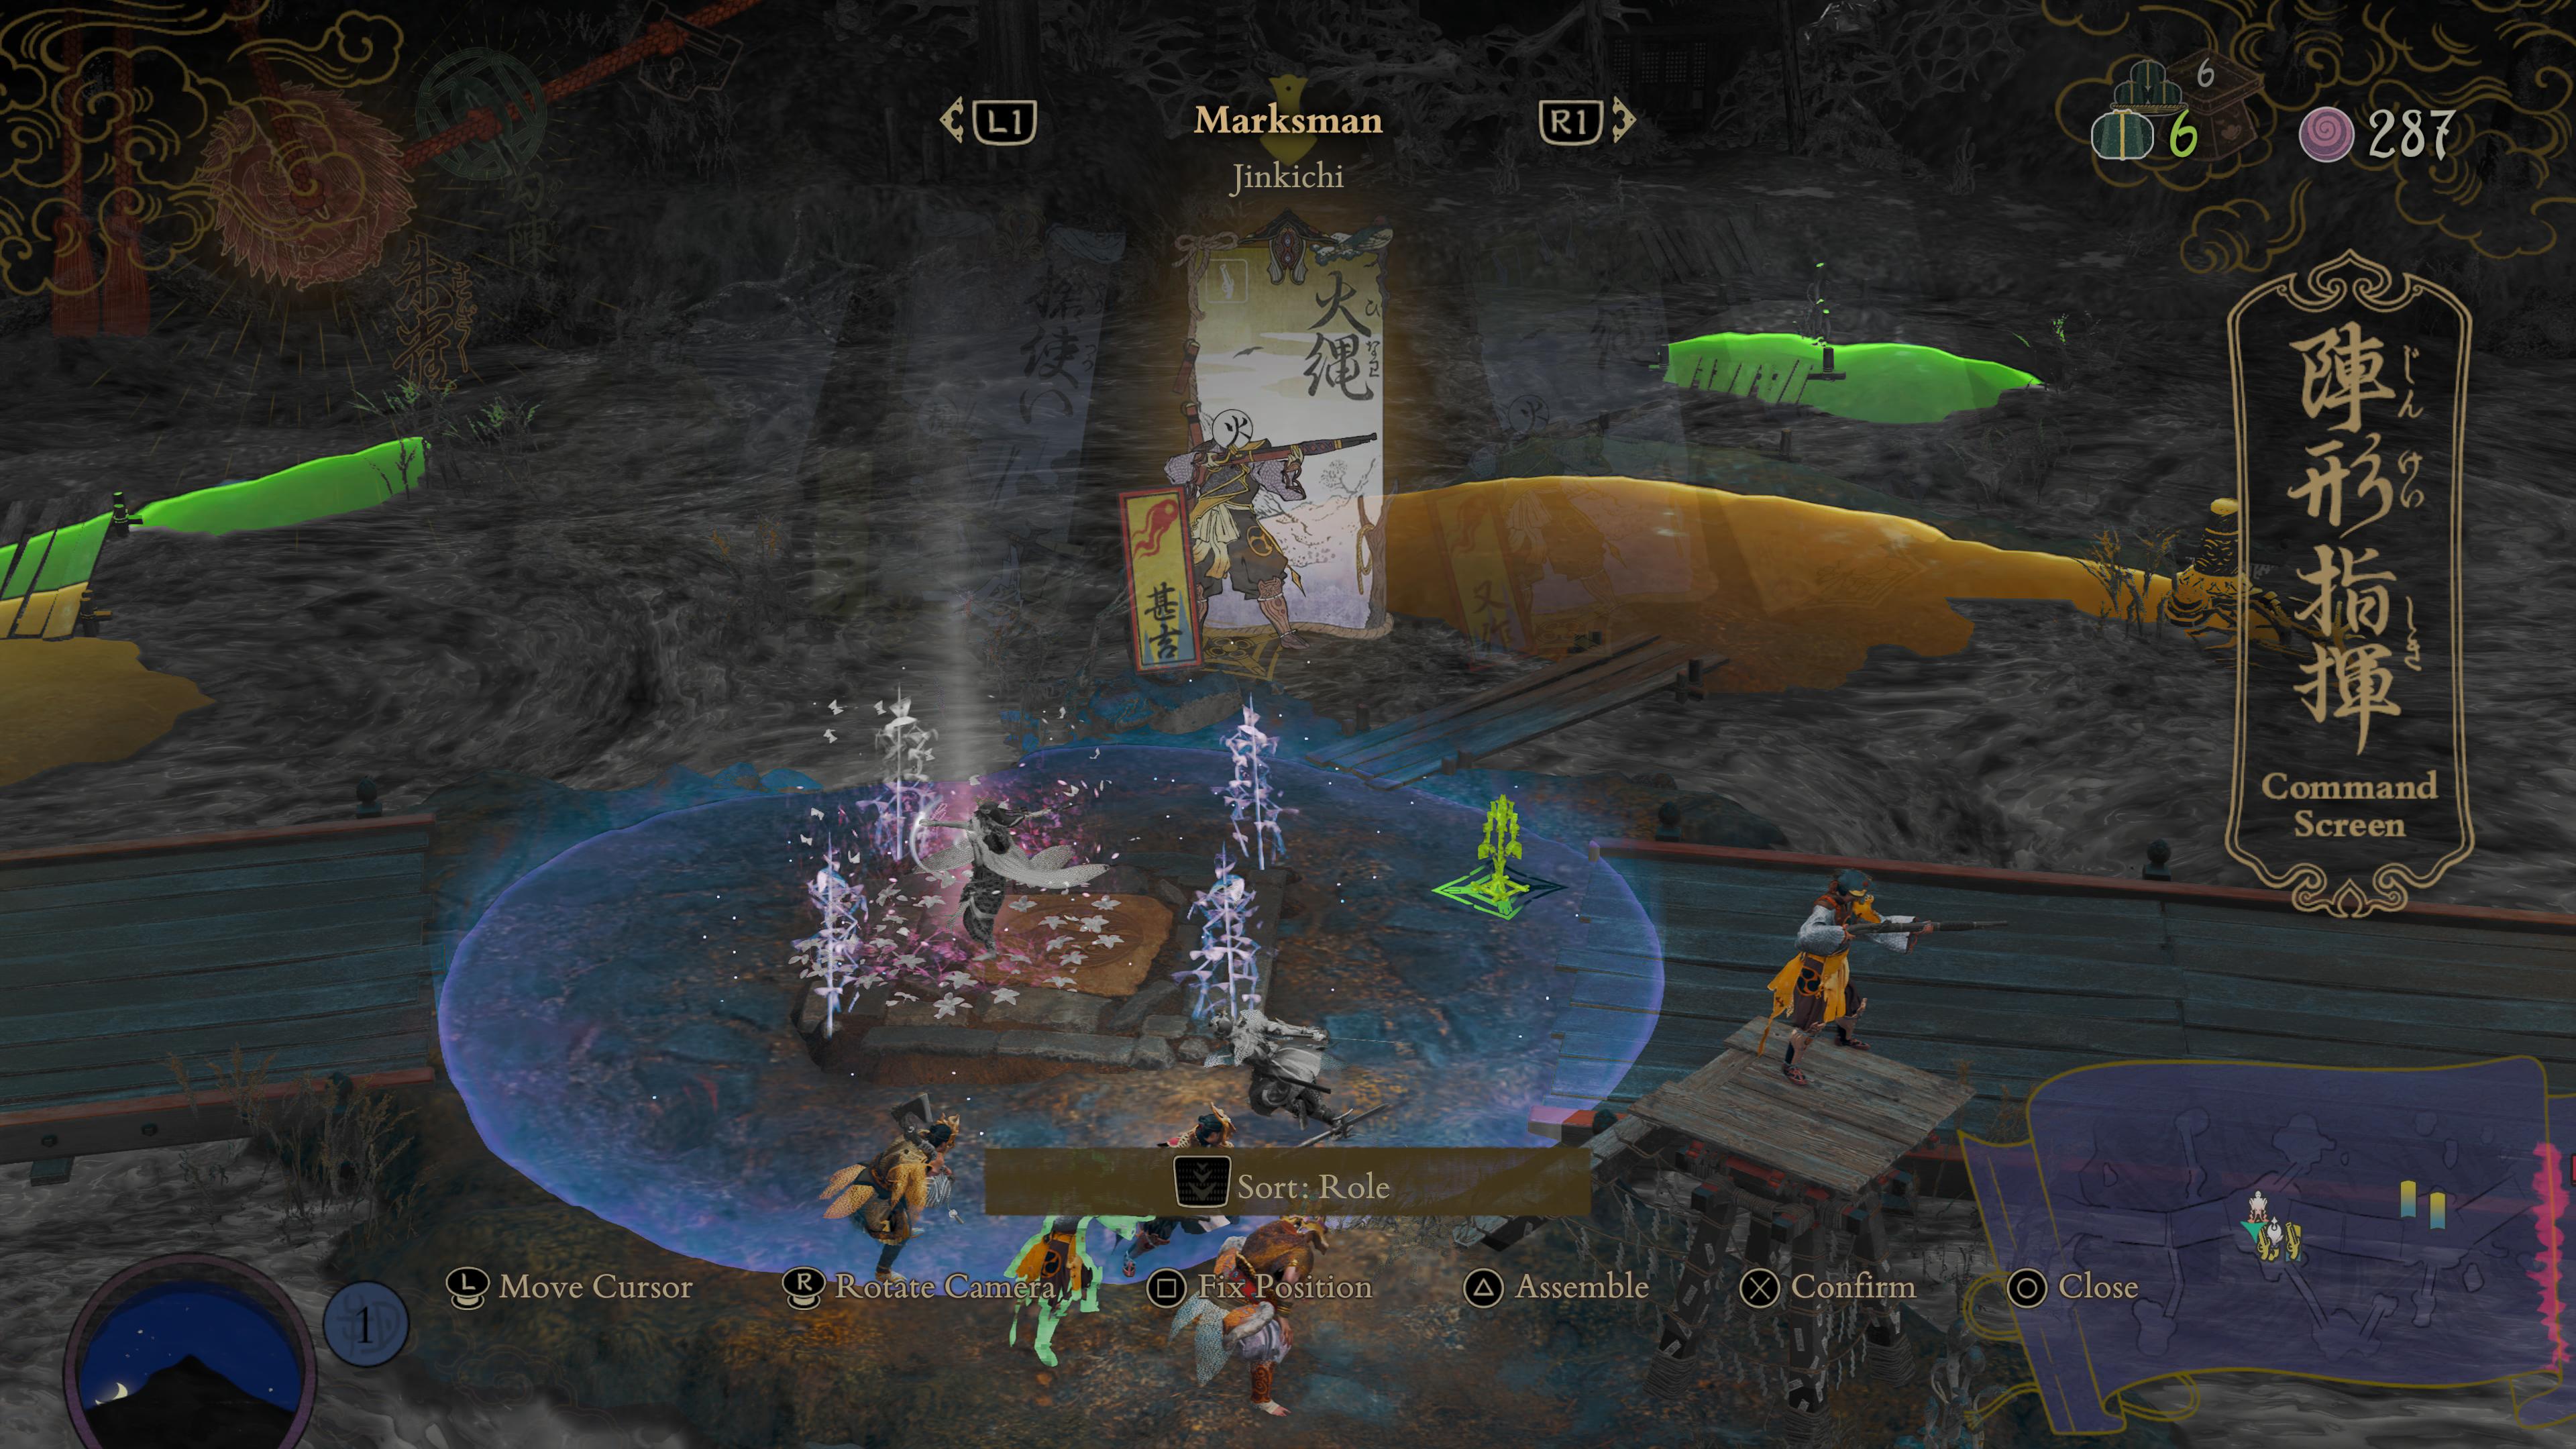 A screenshot showing the player positioning a marksman unit.